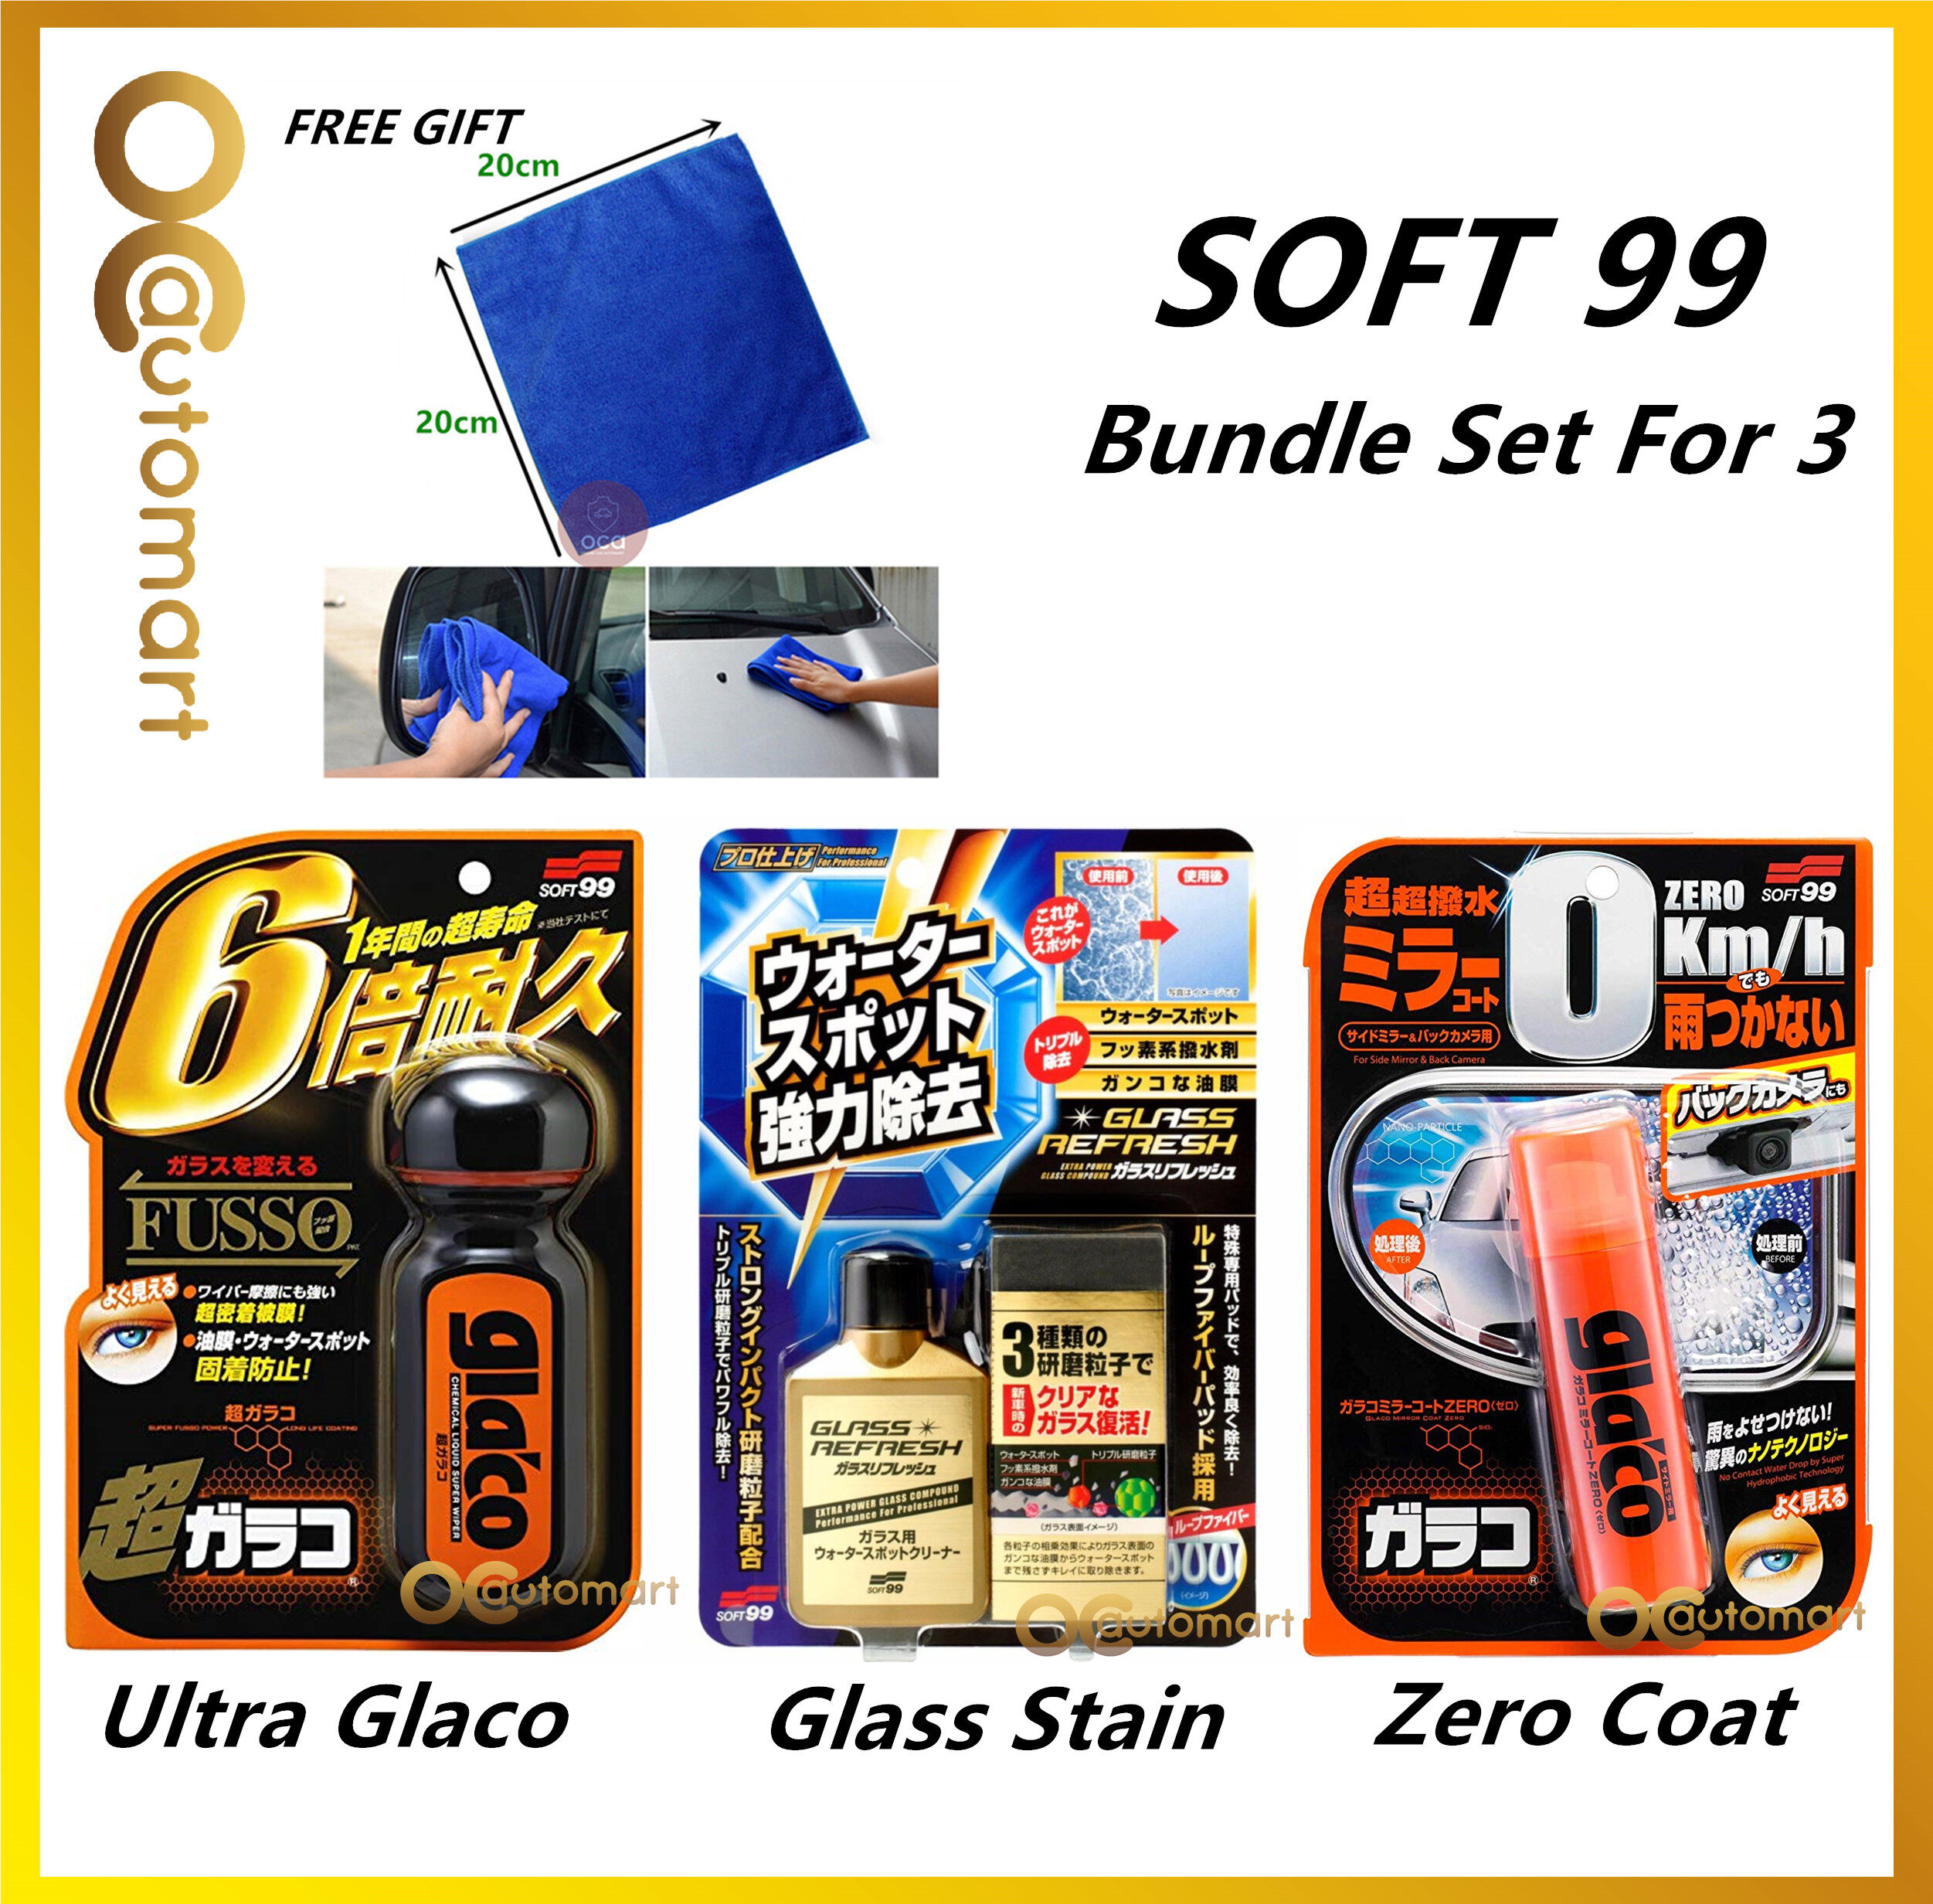 ( Free Gift ) Bundle Set For 3 Soft 99 / Soft99 - GLACO Series-NO1 BEST SELLING IN JAPAN ( ultra glaco + mirror coat zero + glass stain cleaner )